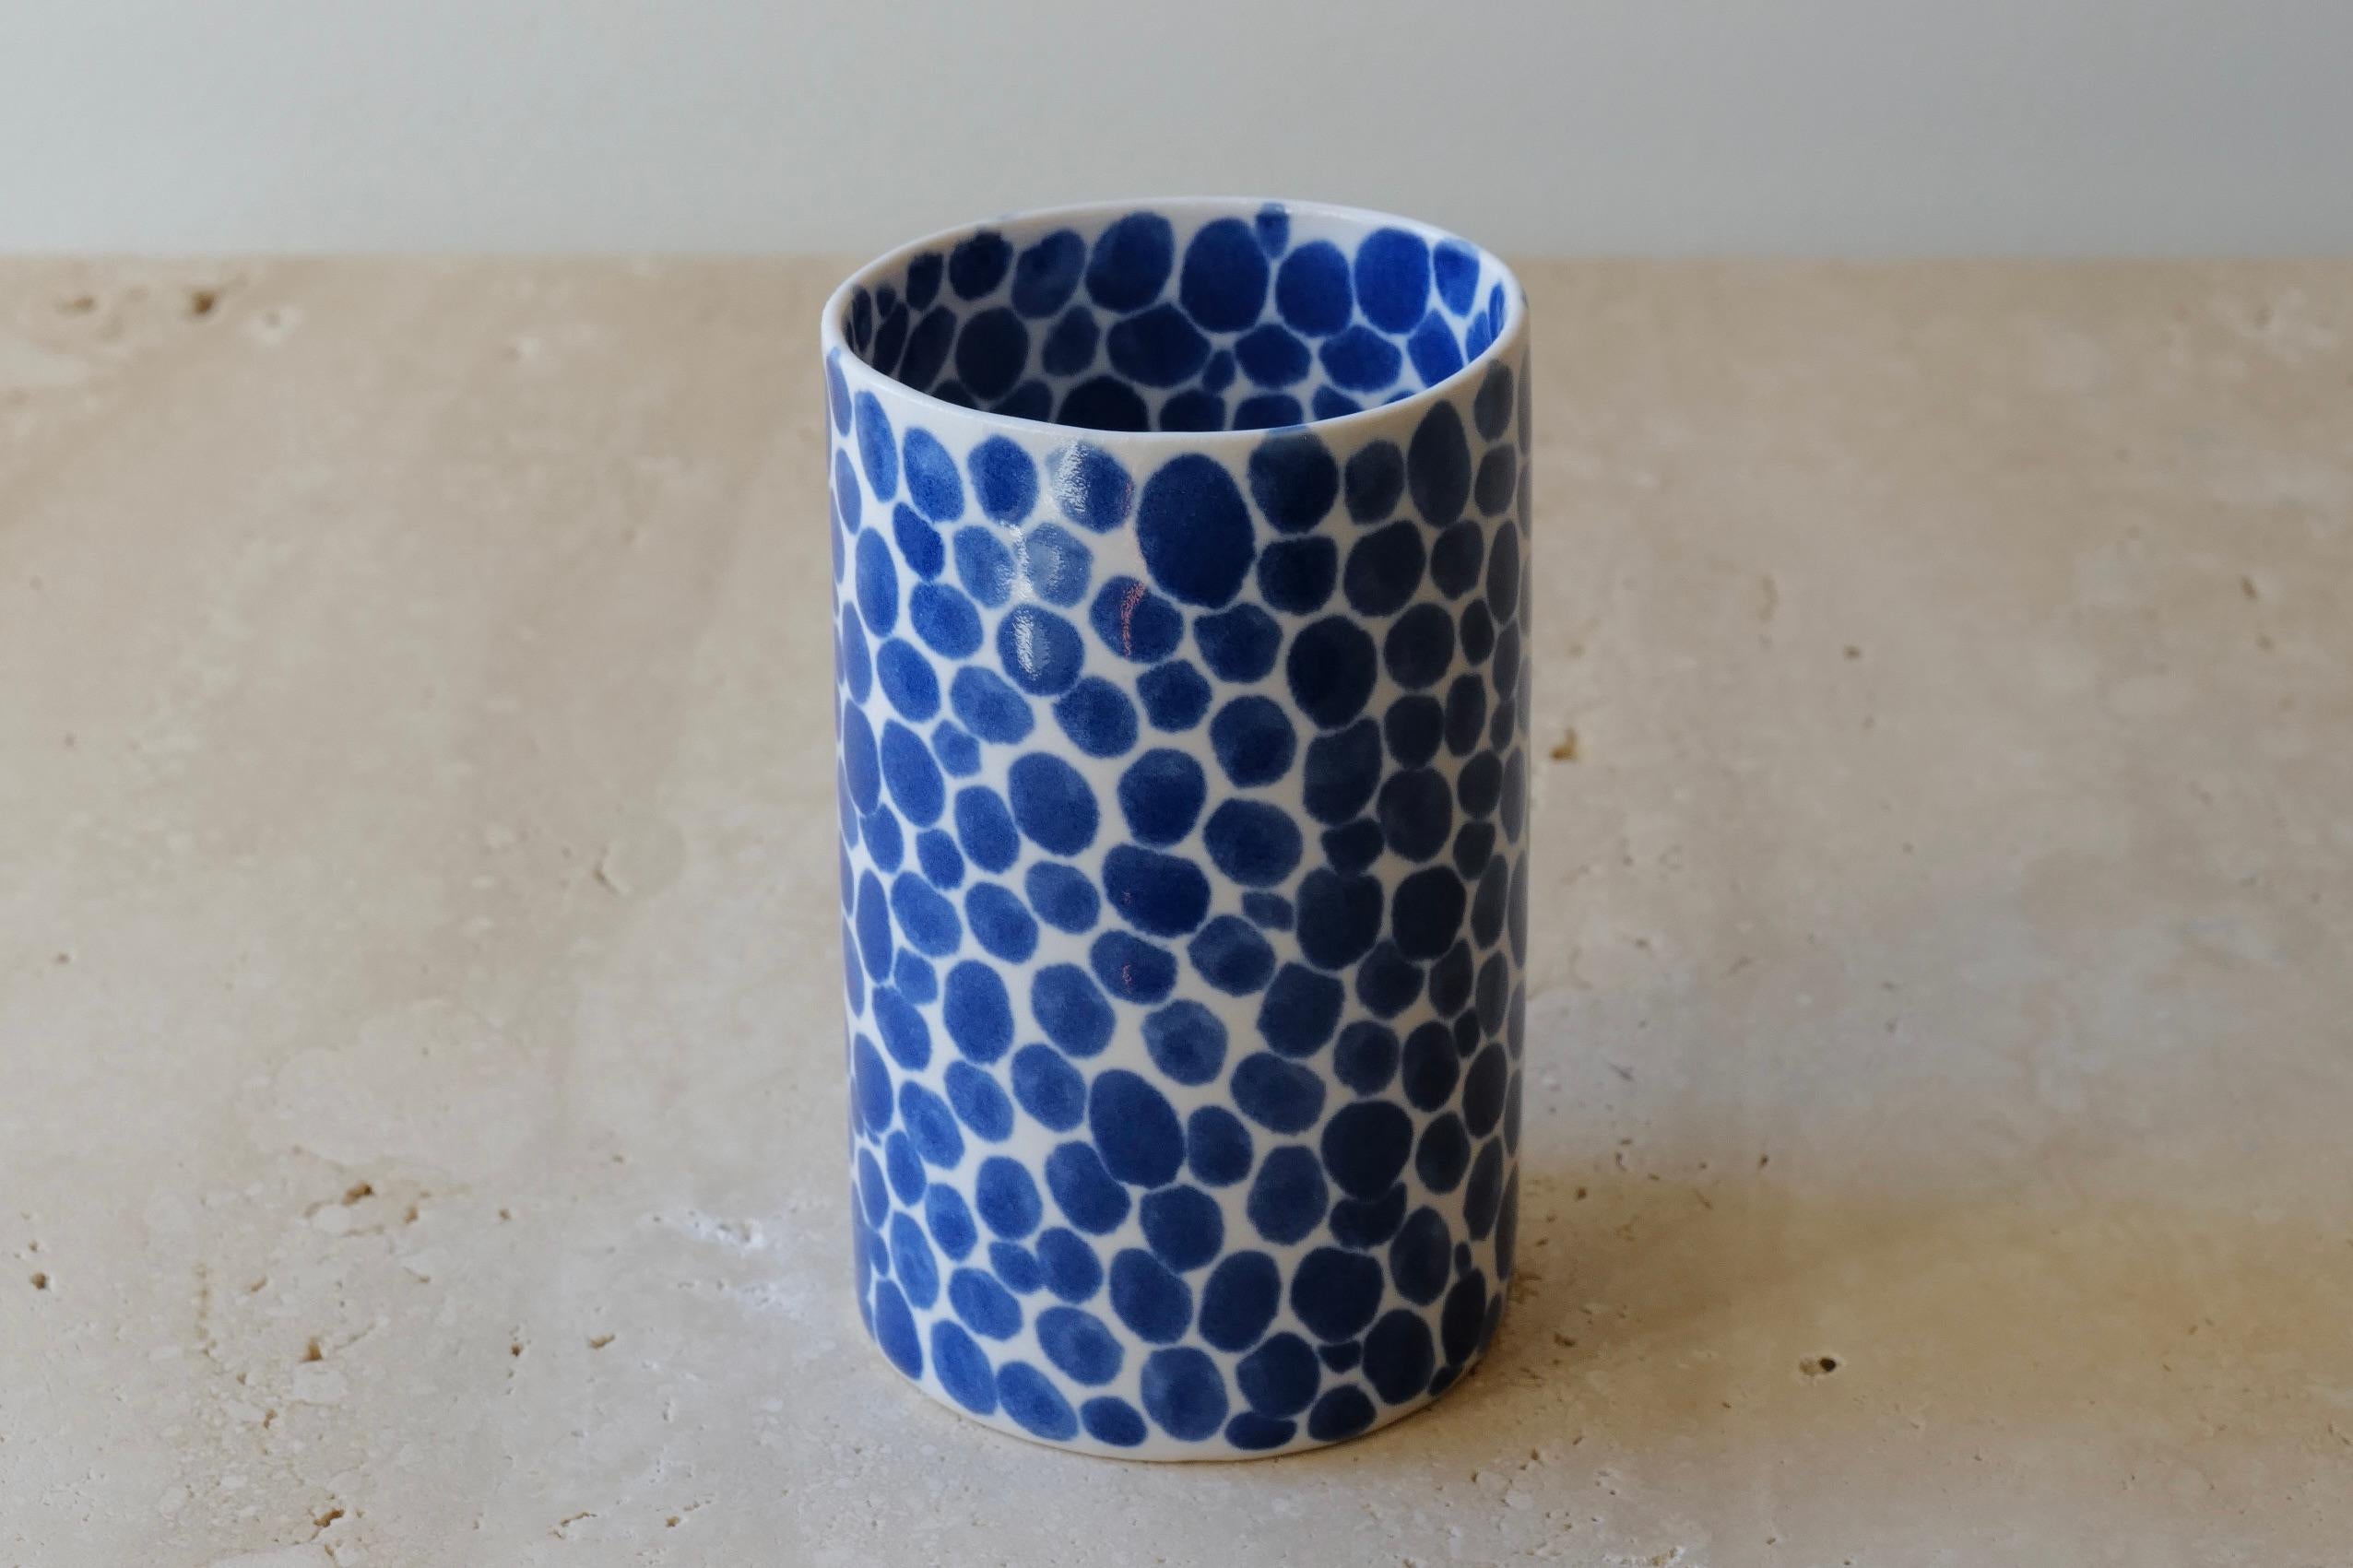 Ceramic drinking cup. Hand-cast in porcelain and once bisque fired, each dot is hand-painted with a traditional cobalt blue glaze. An unconventional layered glazing technique, developed by the artist, is used in these cast porcelain pieces. The